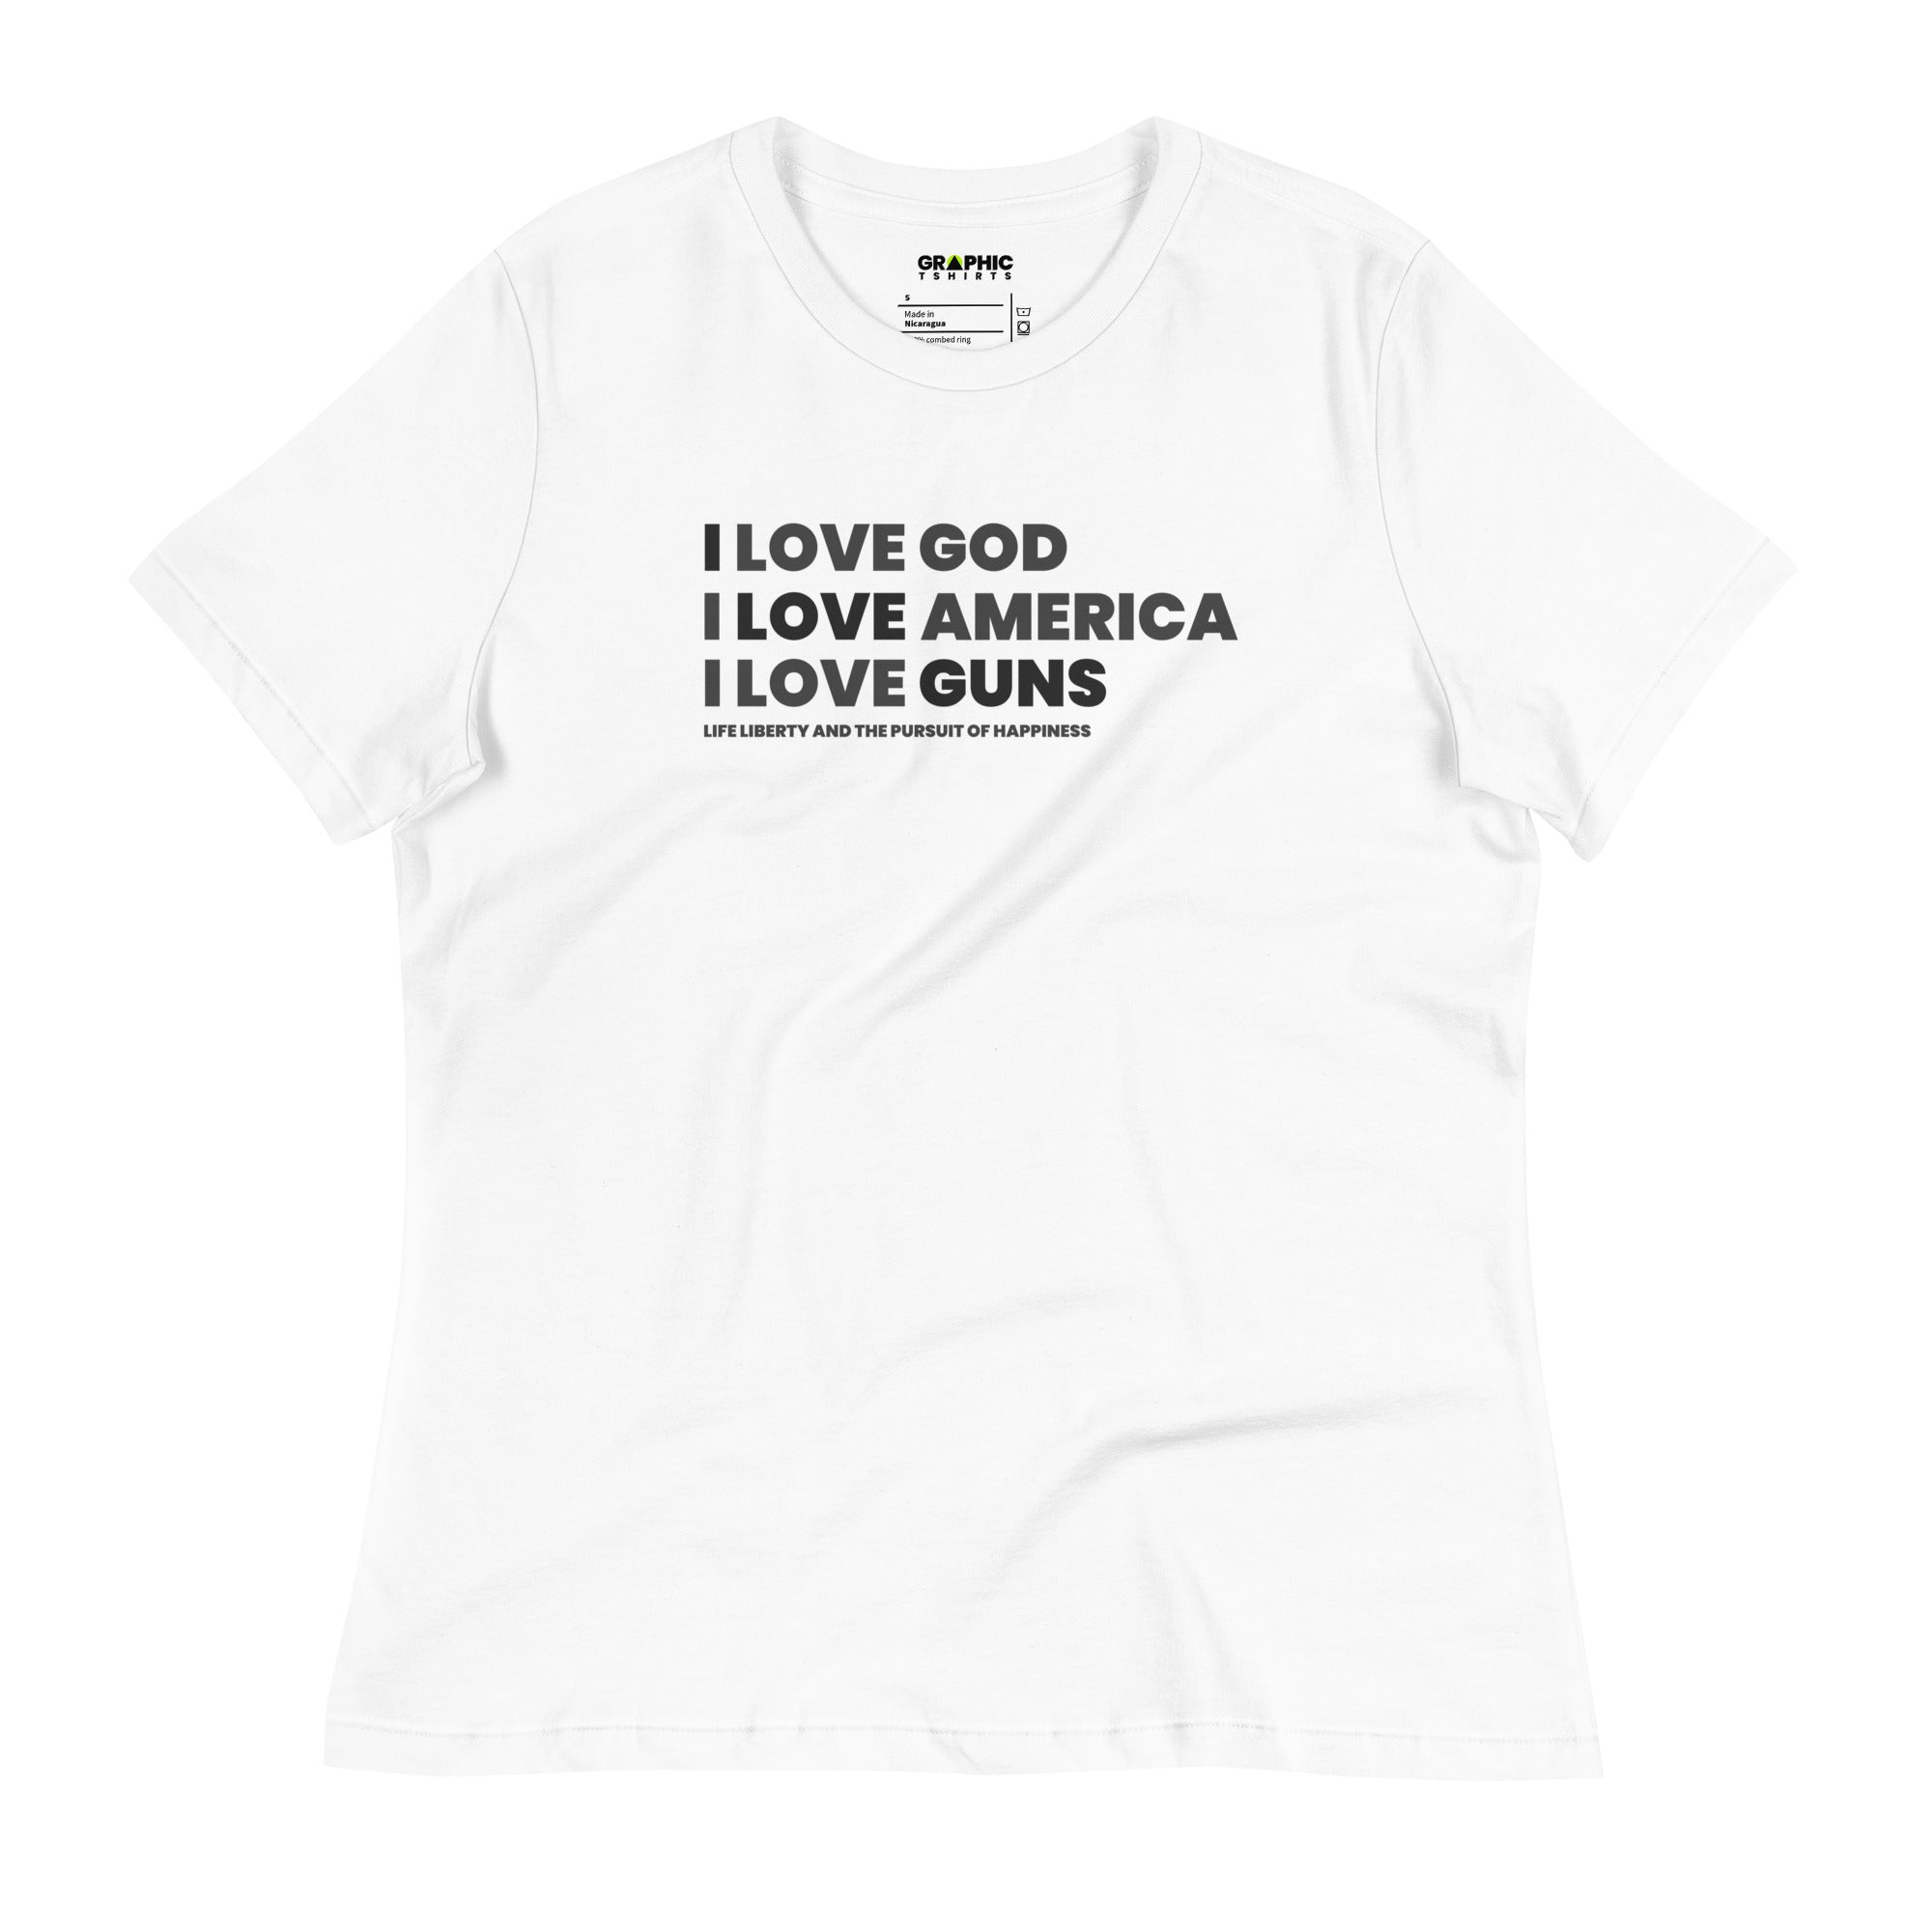 Women's Relaxed T-Shirt - I Love God. I Love America. I Love Guns. Life Liberty and the Pursuit of Happiness - GRAPHIC T-SHIRTS